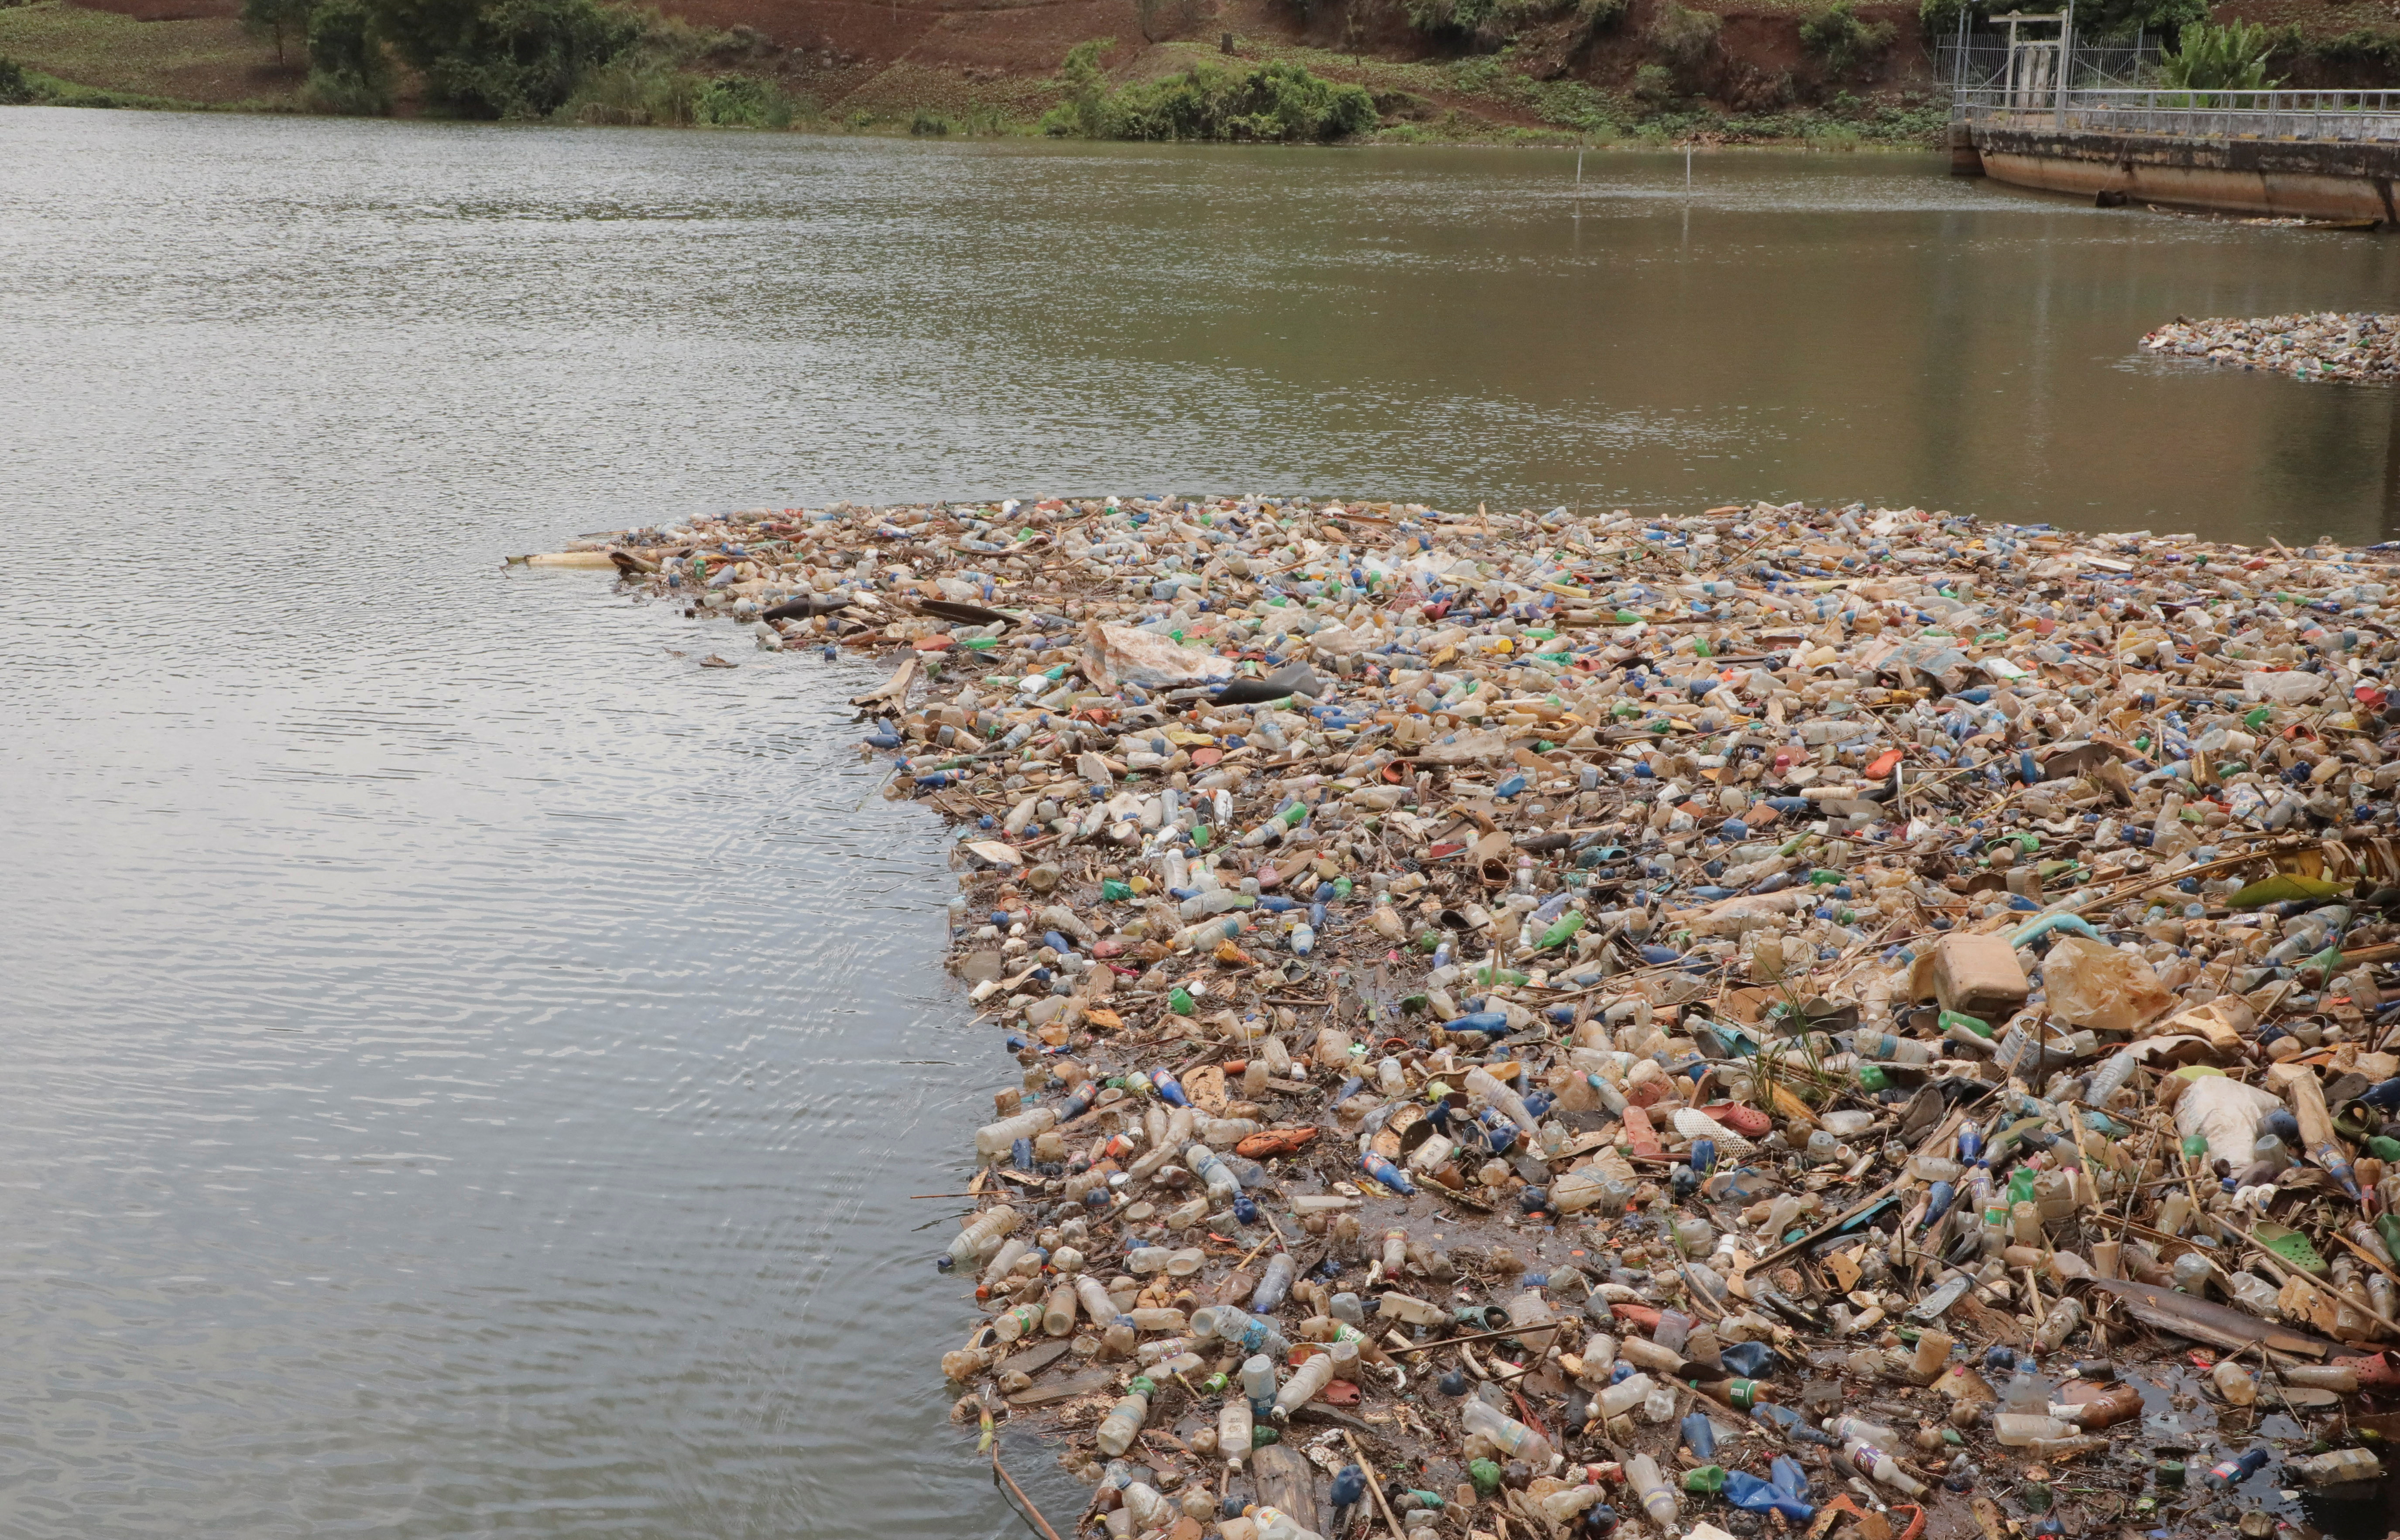 A Congolese city is turning its plastic problem into profit in Bukavu